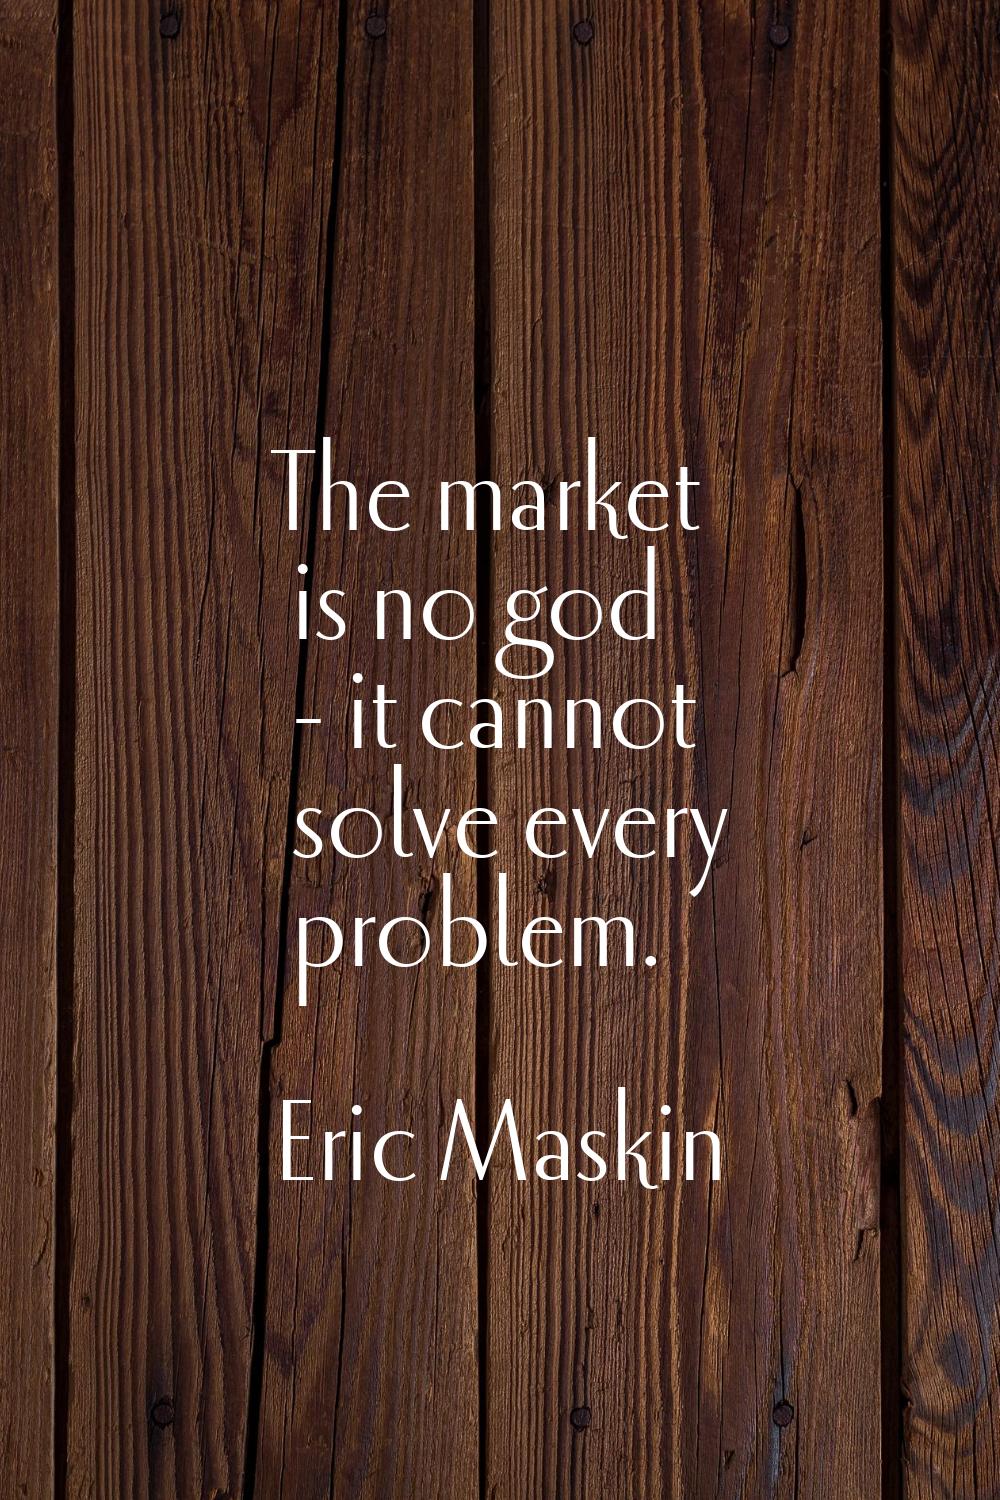 The market is no god - it cannot solve every problem.